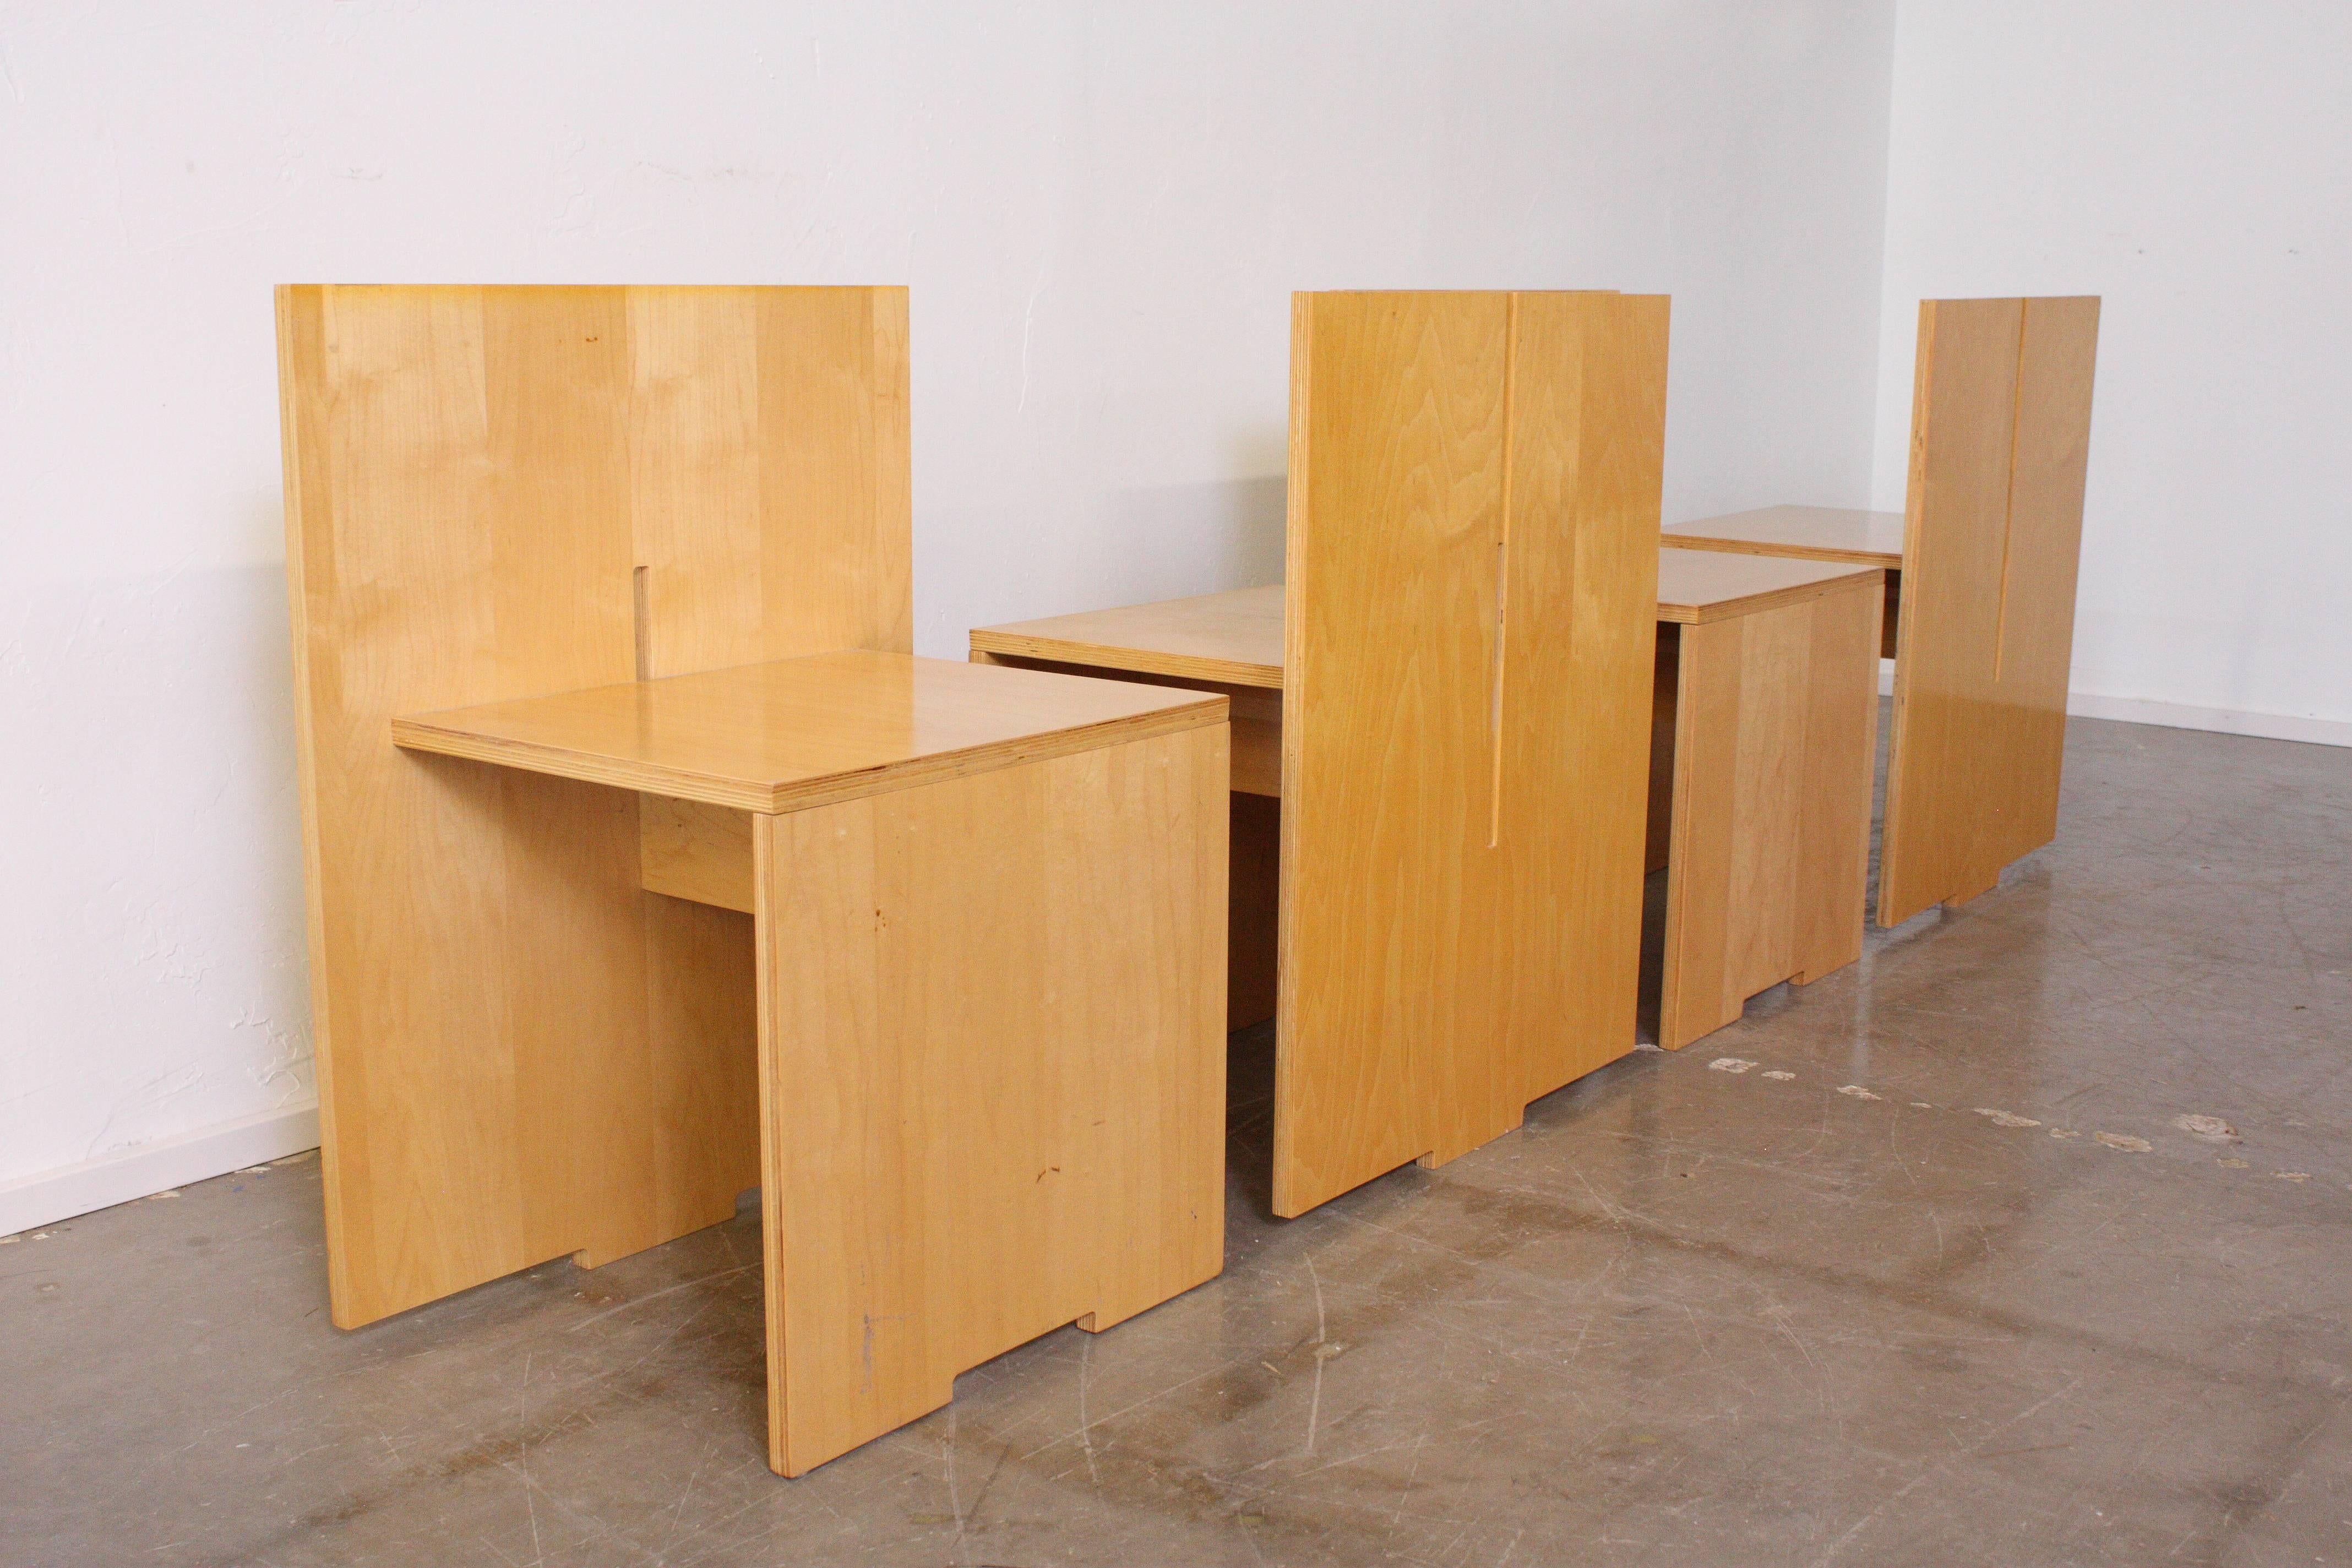 Late 20th Century Architectural Dining Table and Ten Chairs in the Style of Donald Judd